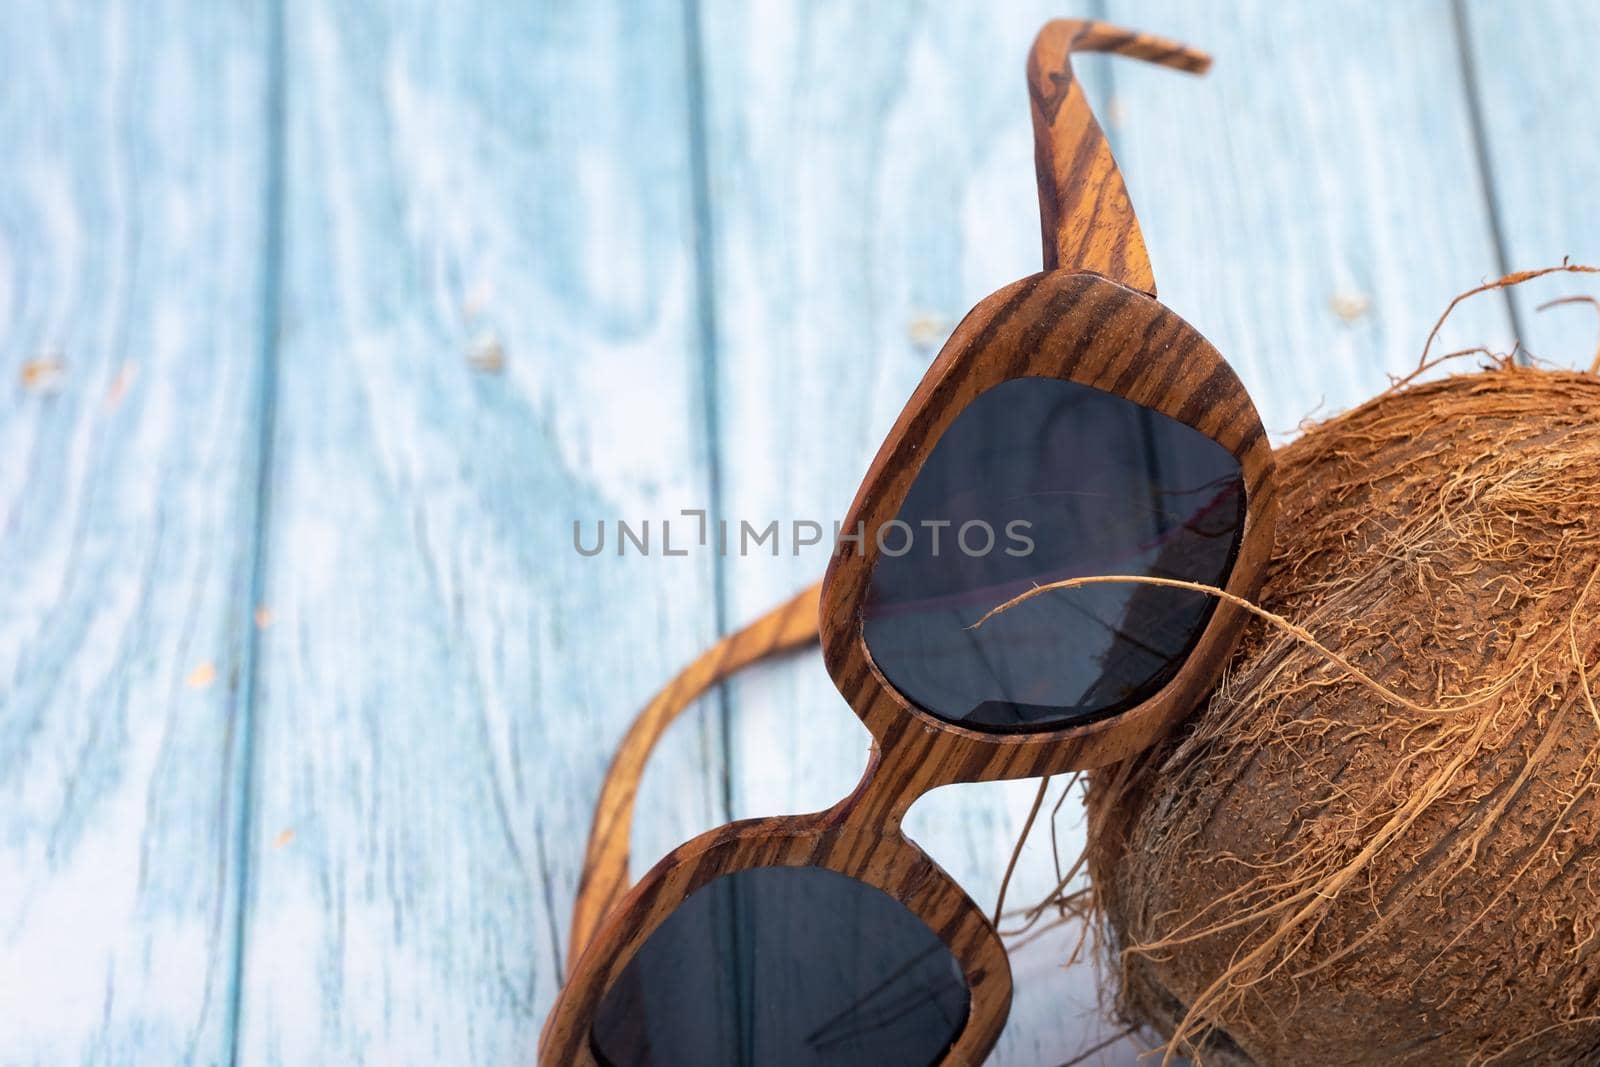 whole coconuts and wooden glasses on a blue wooden background.